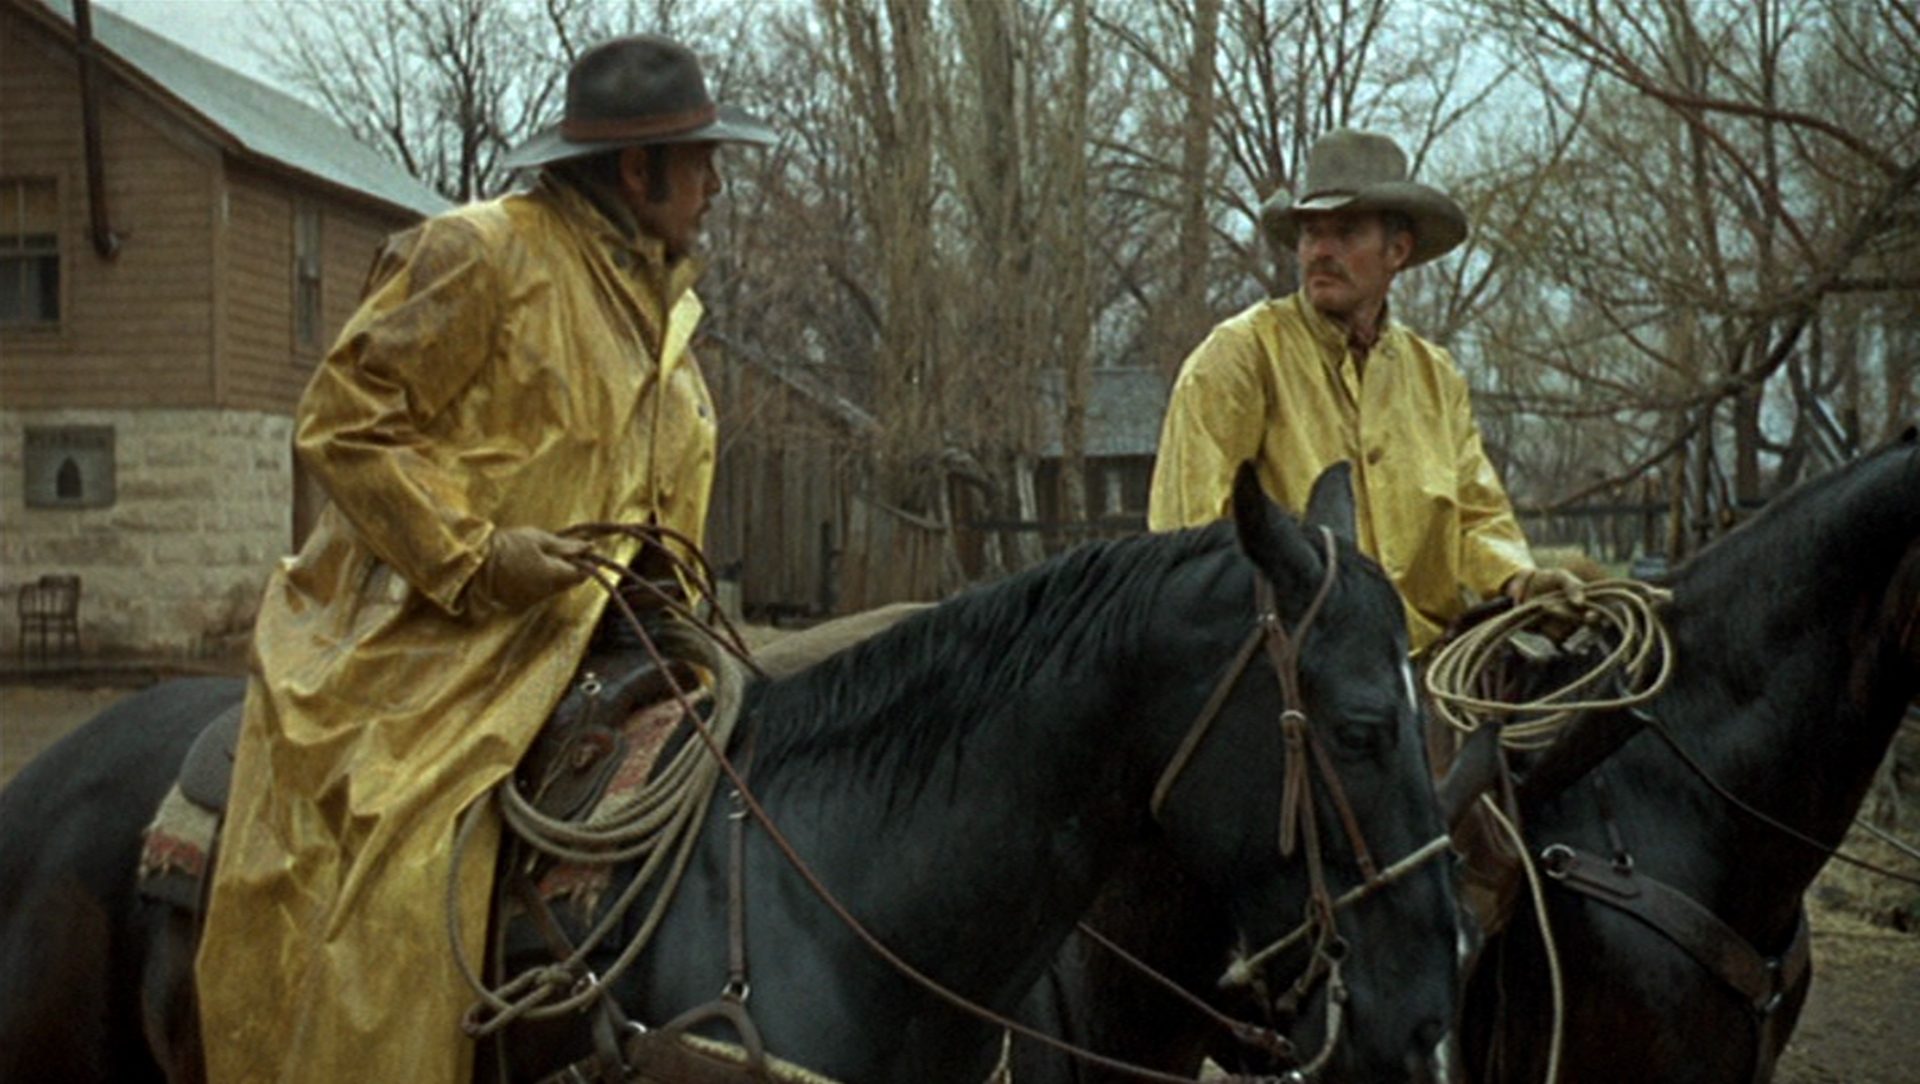 Will Penny talking to a ranch hand on horseback in rain jackets.